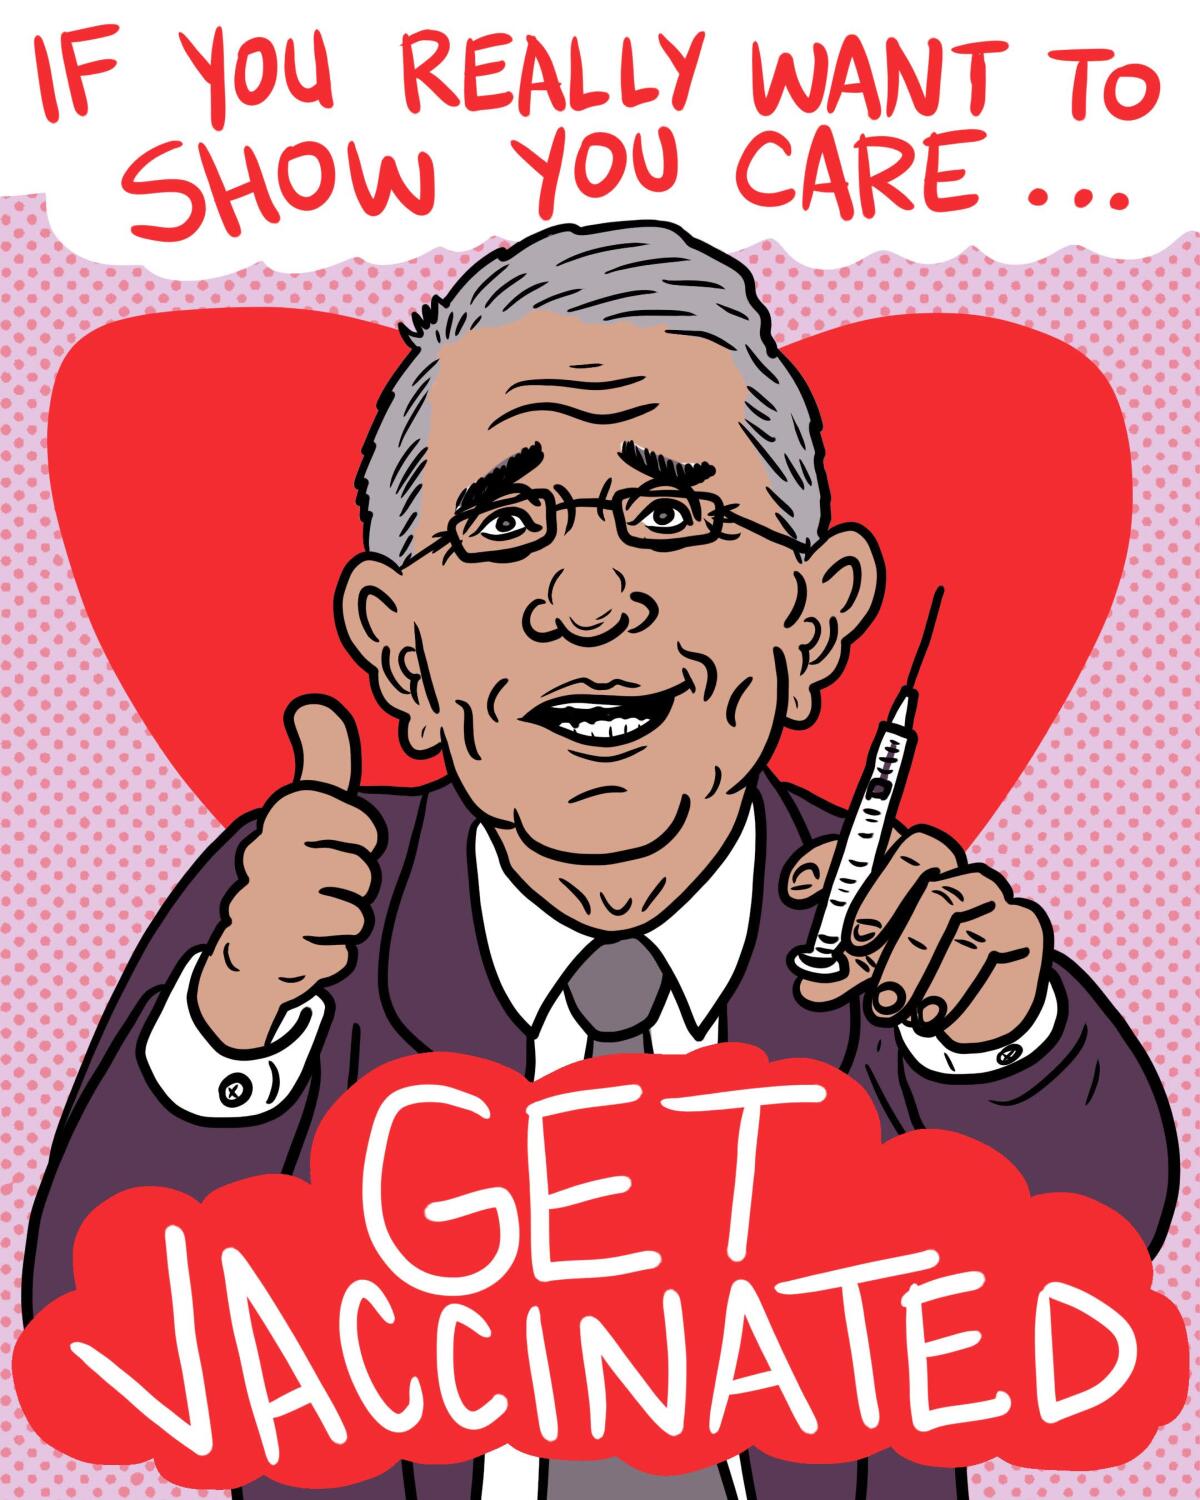 A Valentine's Day card with an illustration of Dr. Anthony Fauci holding a syringe while giving a thumbs-up.